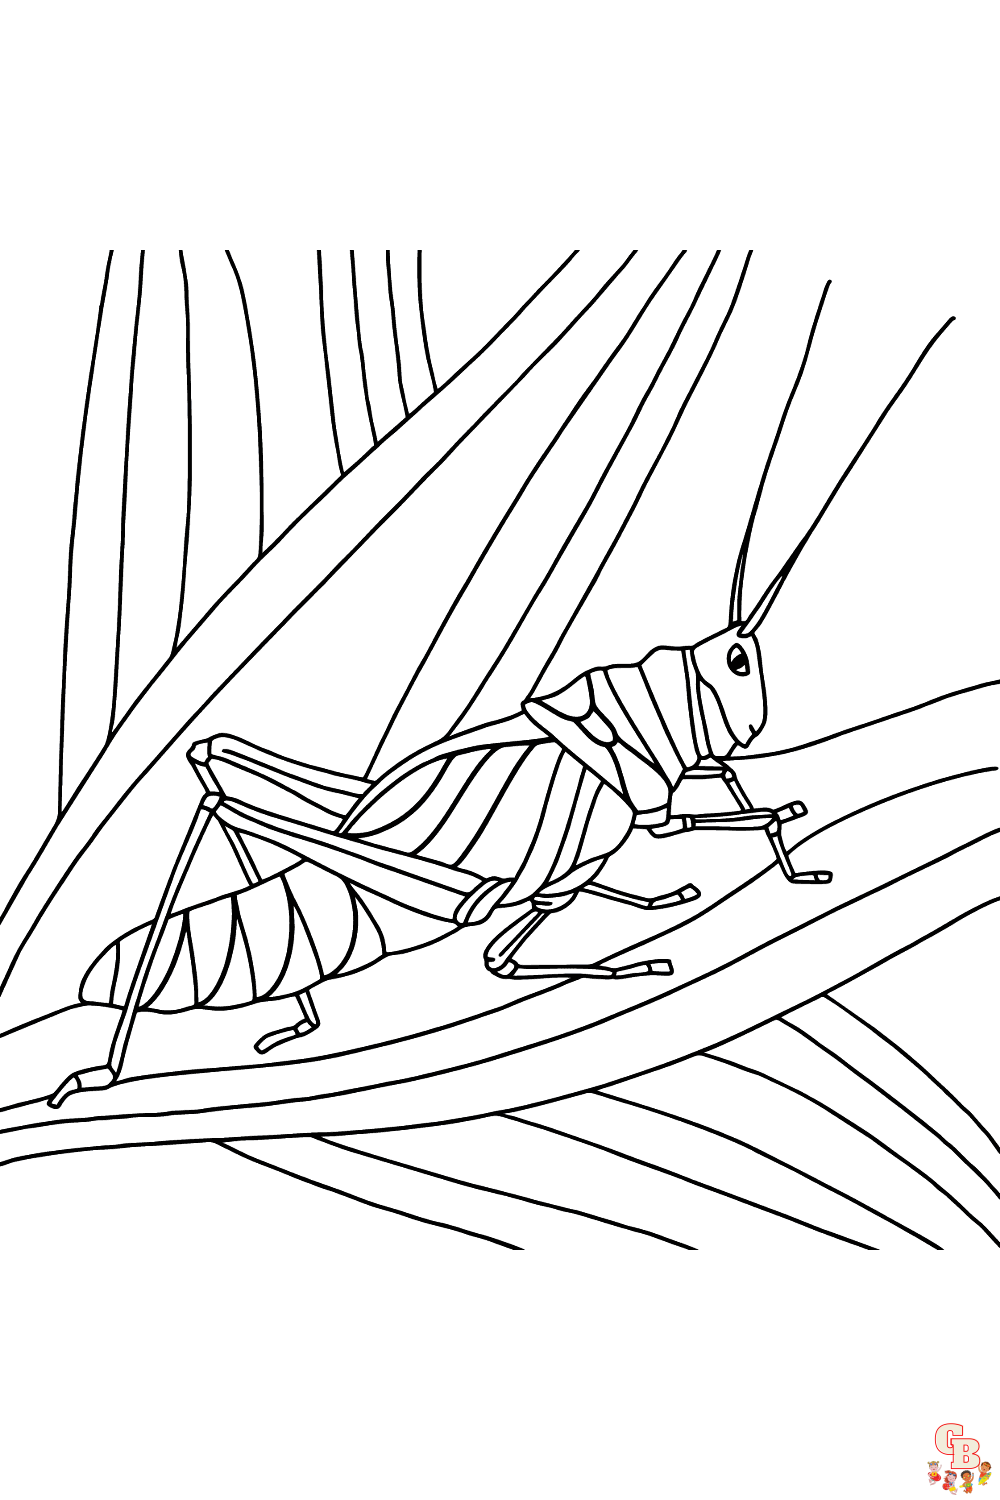 Grasshopper Coloring Pages 3